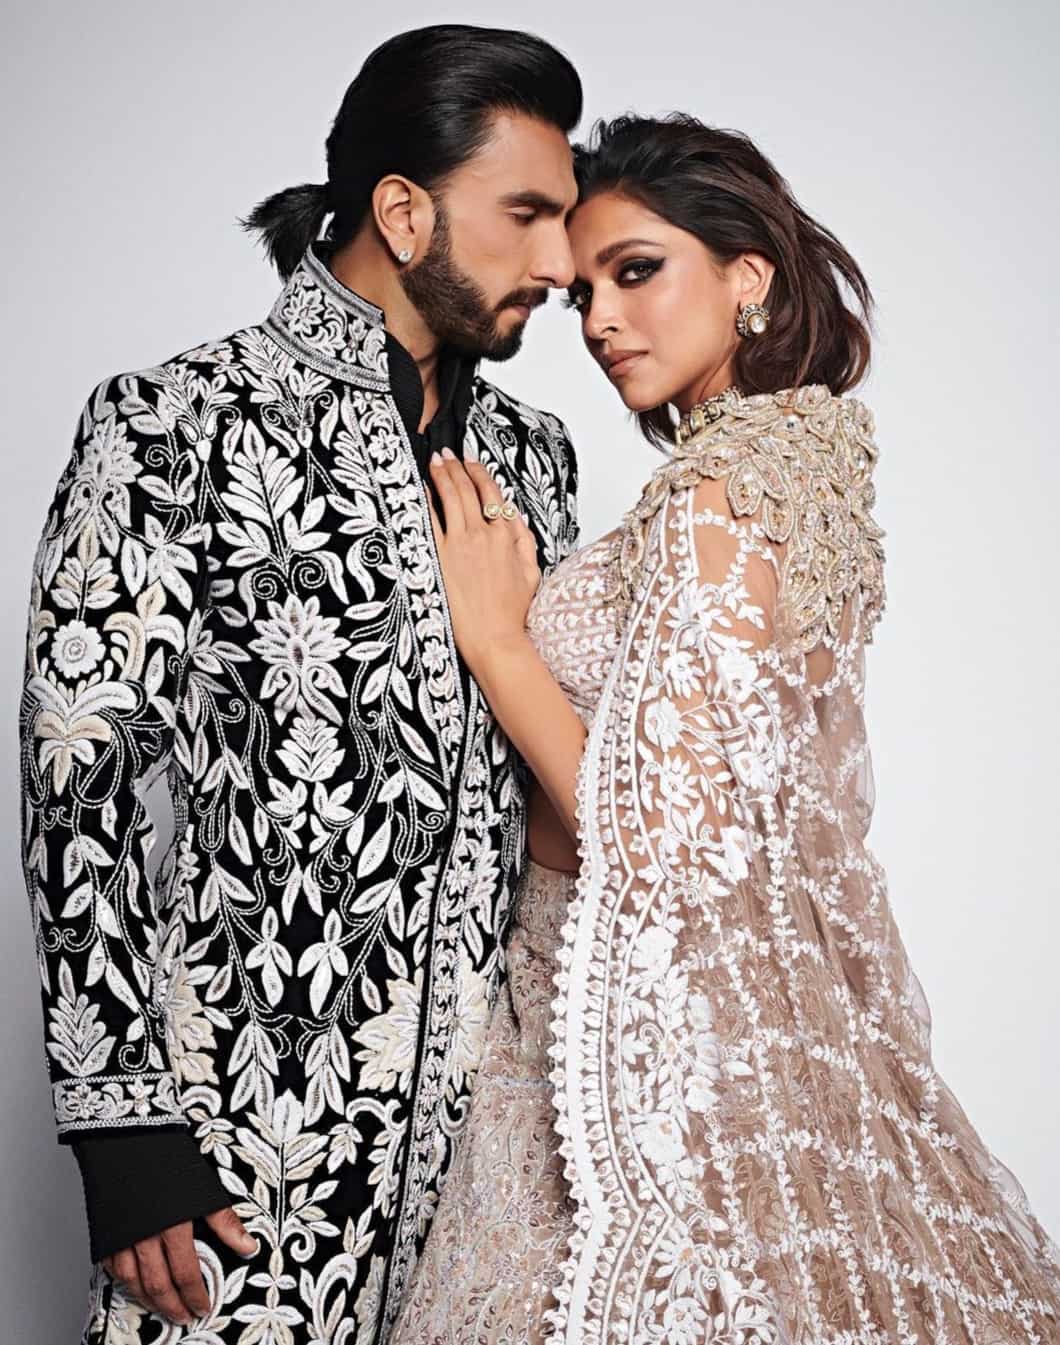 At the show, Deepika Padukone and Ranveer Singh captivated everyone's attention